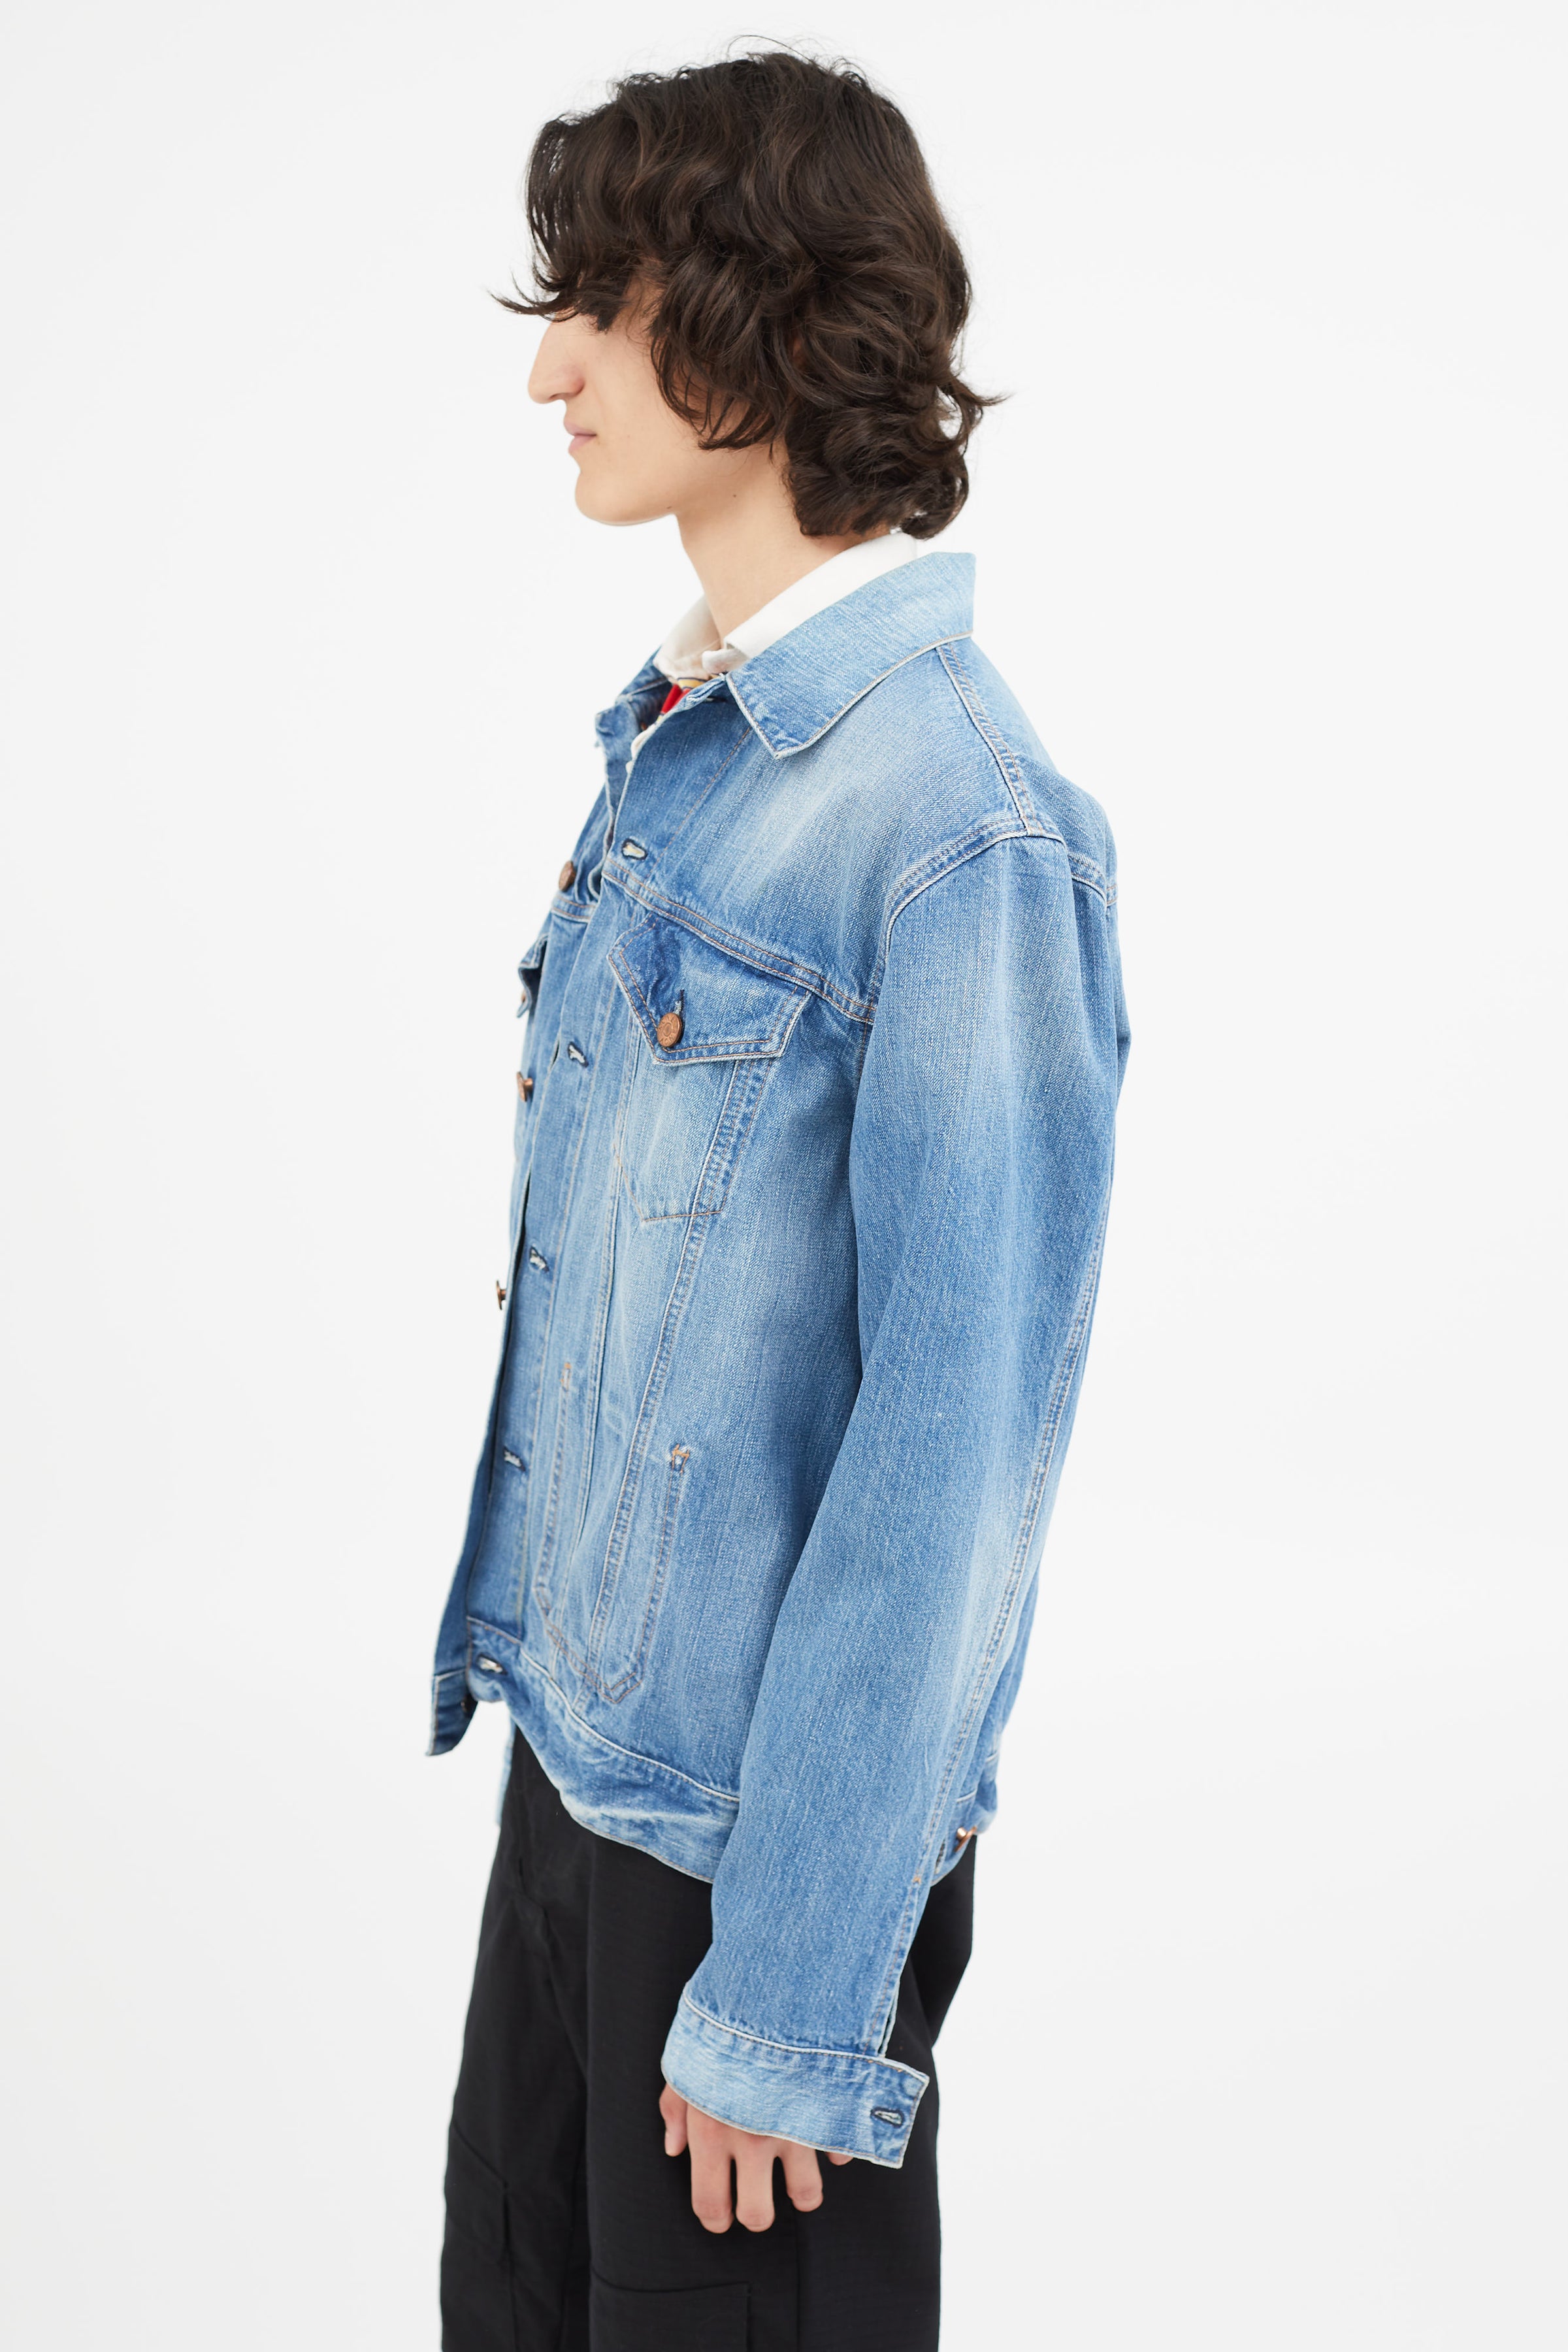 SUNSEAacne studious washed denim 20aw